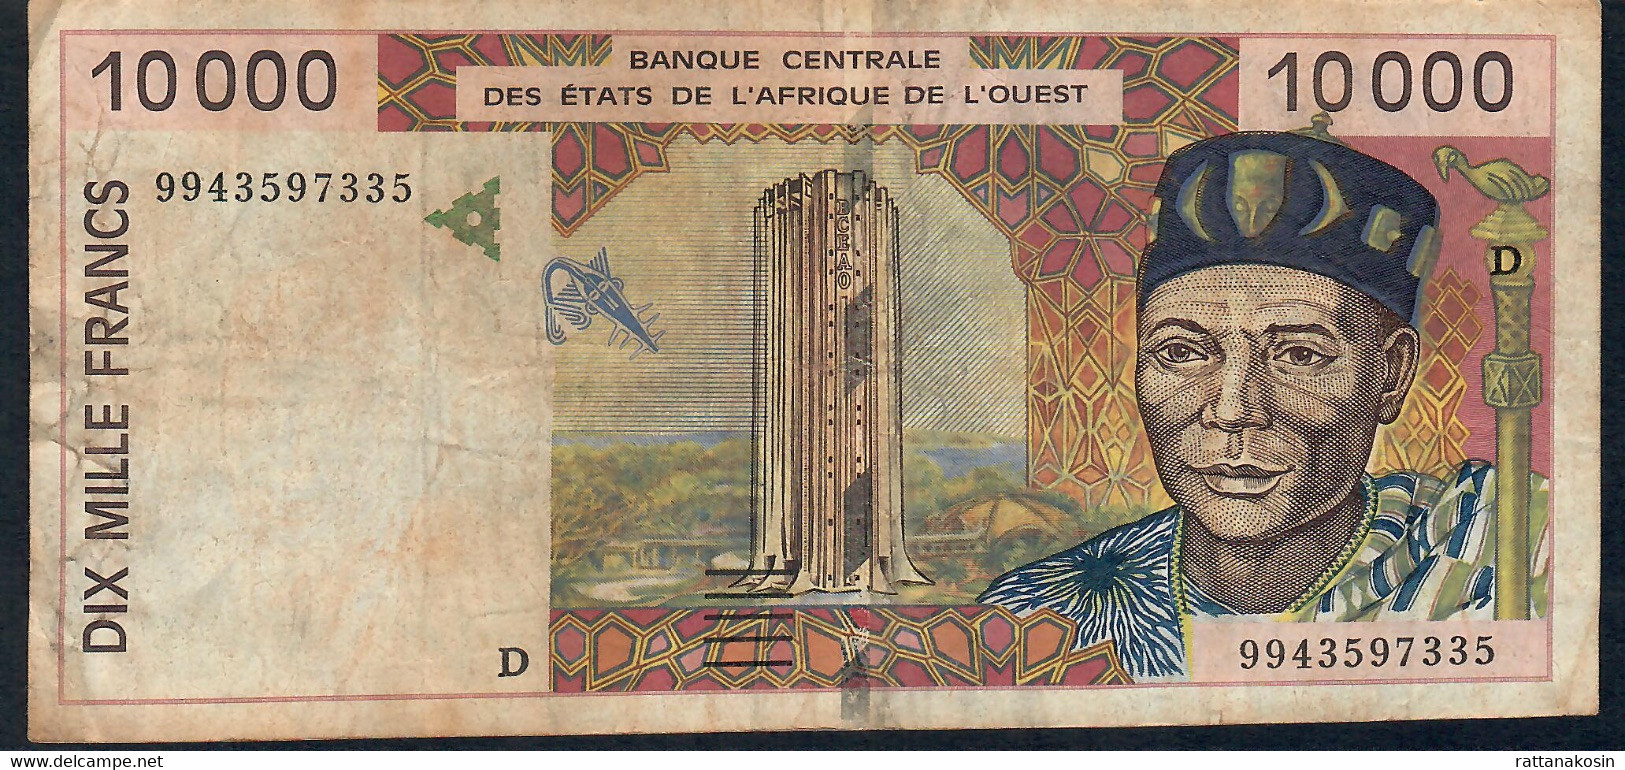 W.A.S. MALI P414Dh  10000 Or 10.000 FRANCS (19)99 1999 Signature 29      FINE NO  P.h. - West African States